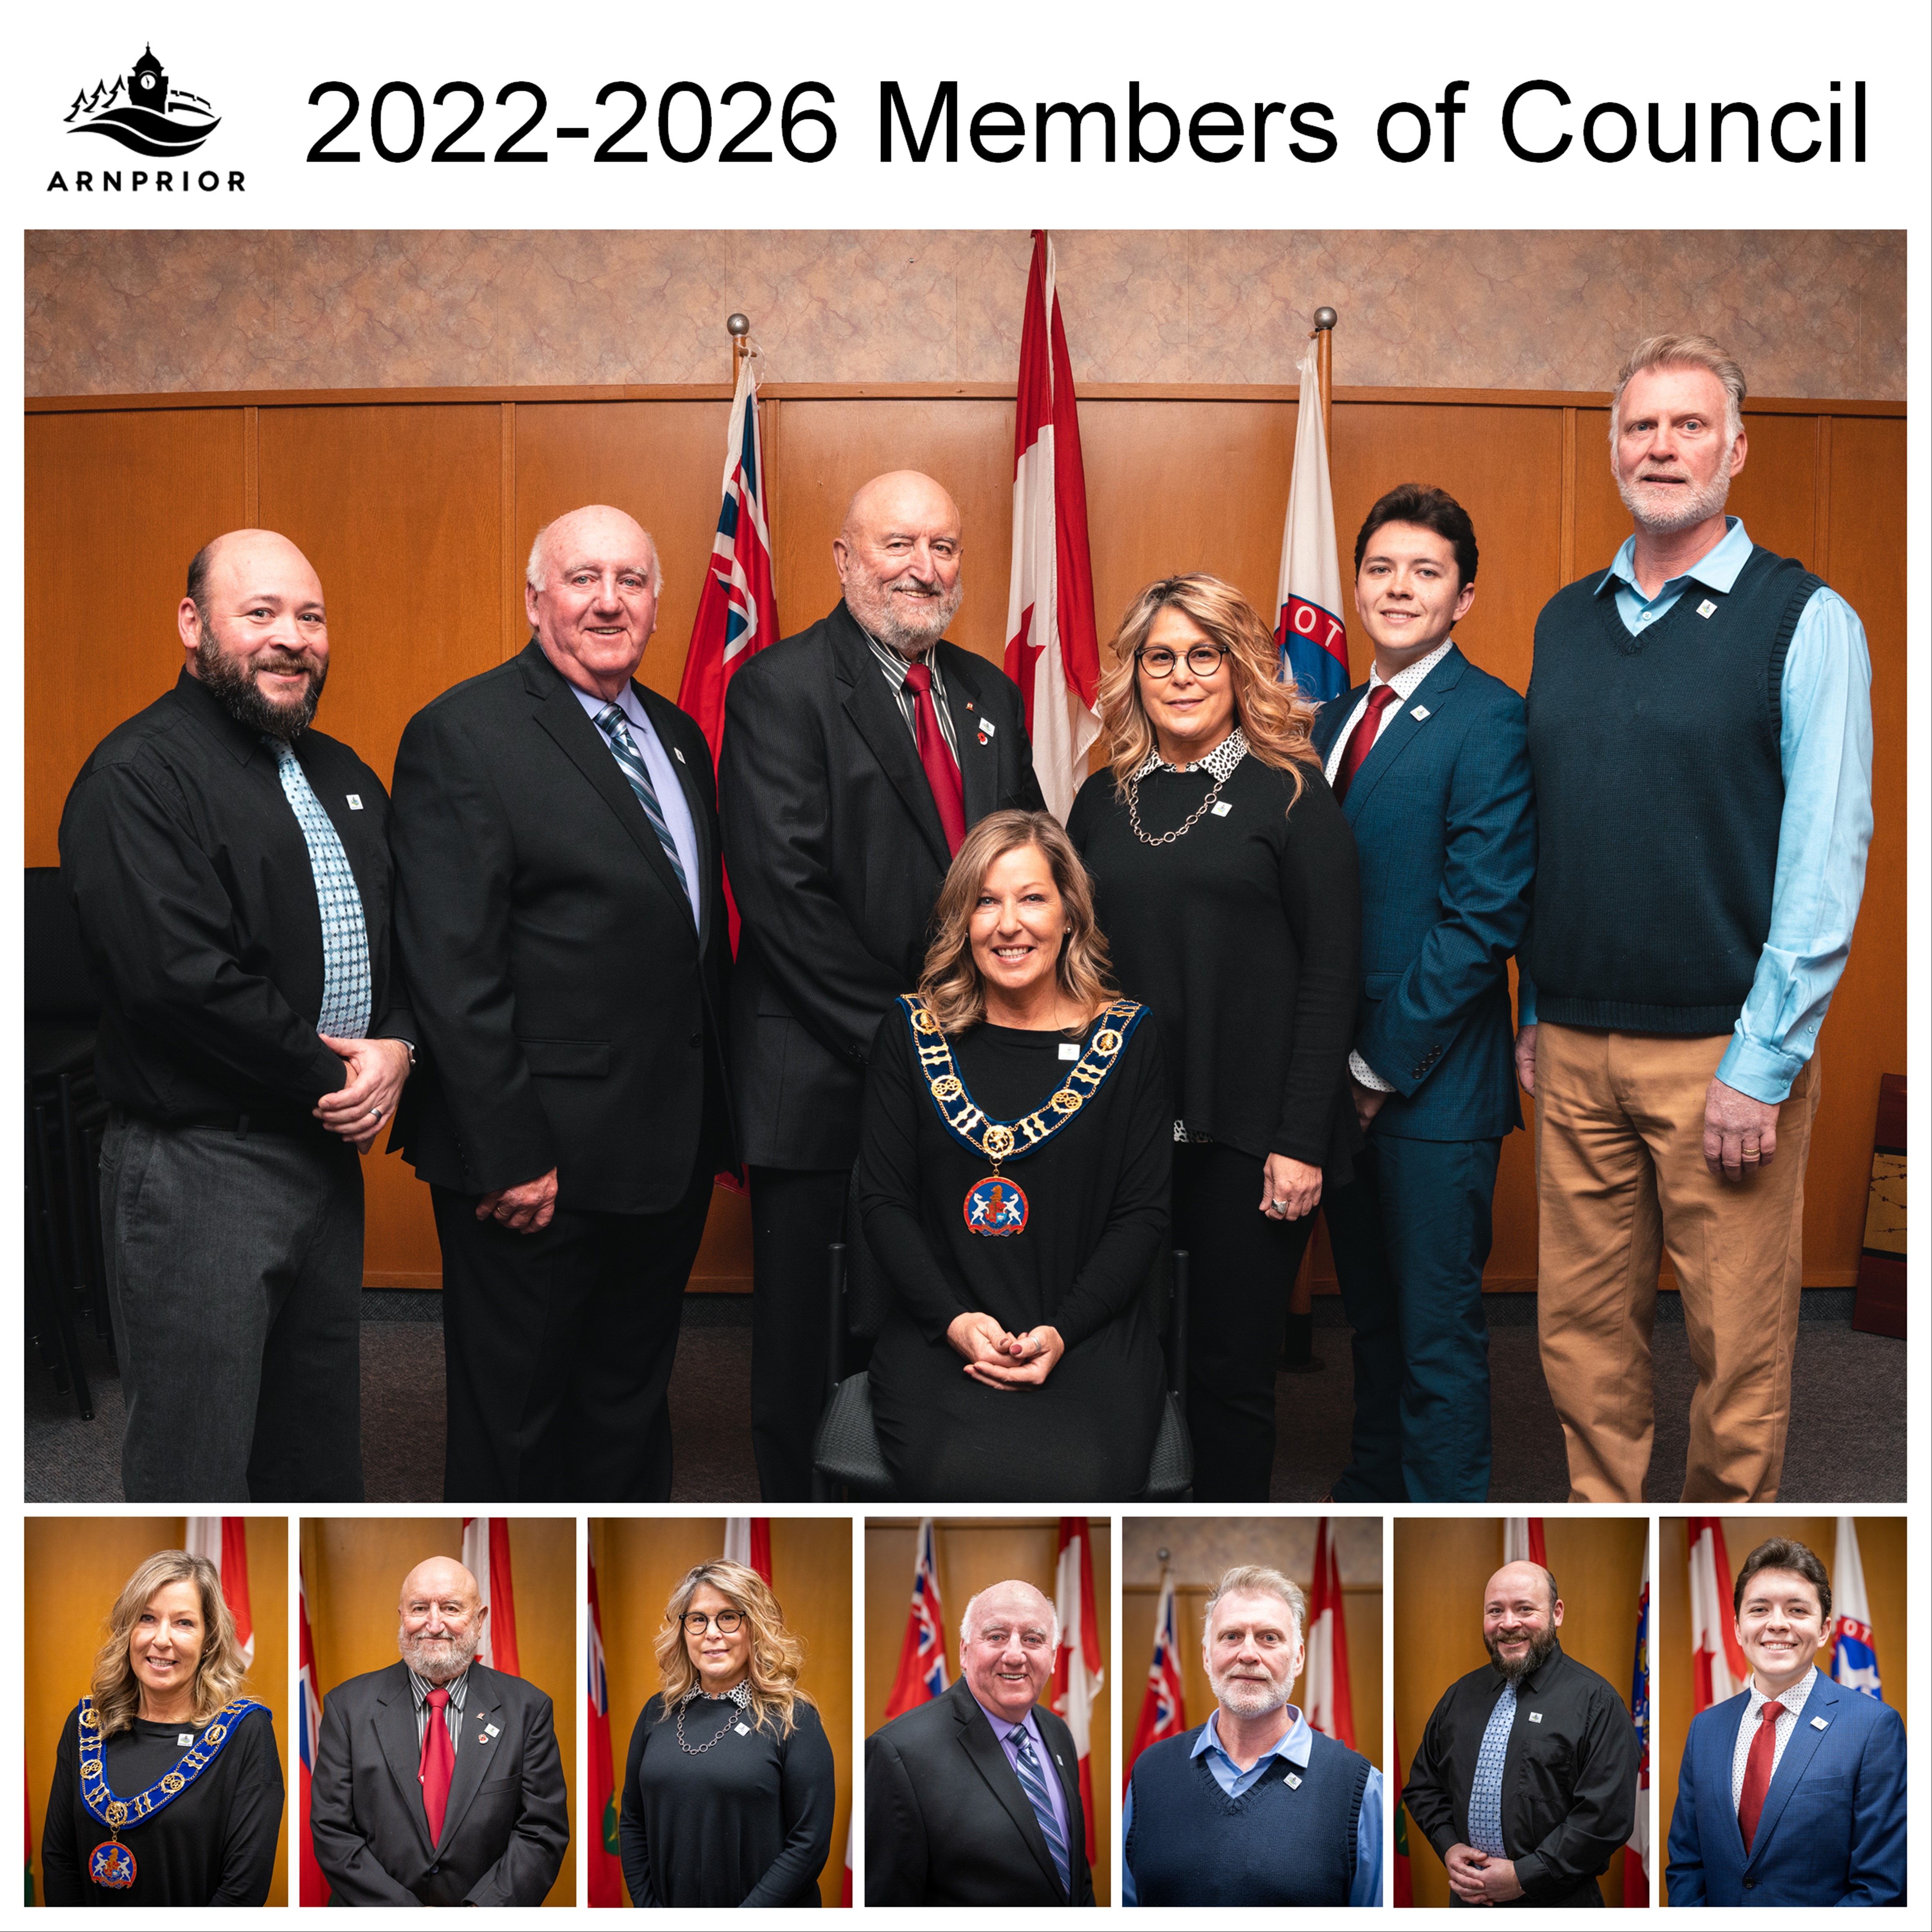 Photograph of the 2022-2026 Members of Council with individual portraits and group photo